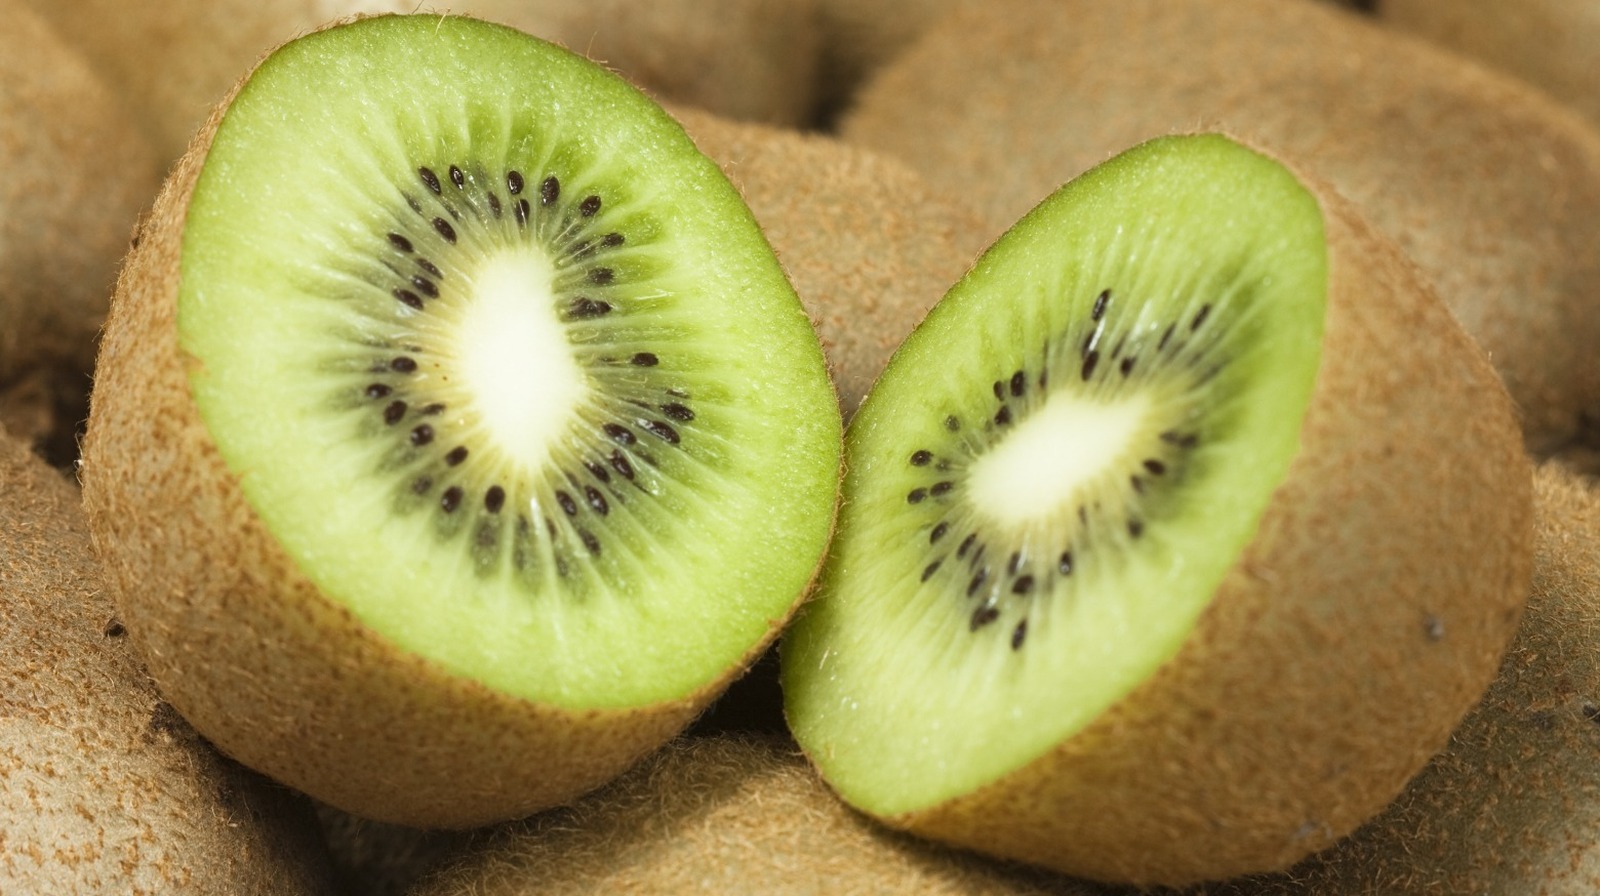 FDA: Kiwifruit Recall Due To Listeria Concerns Affects 14 States